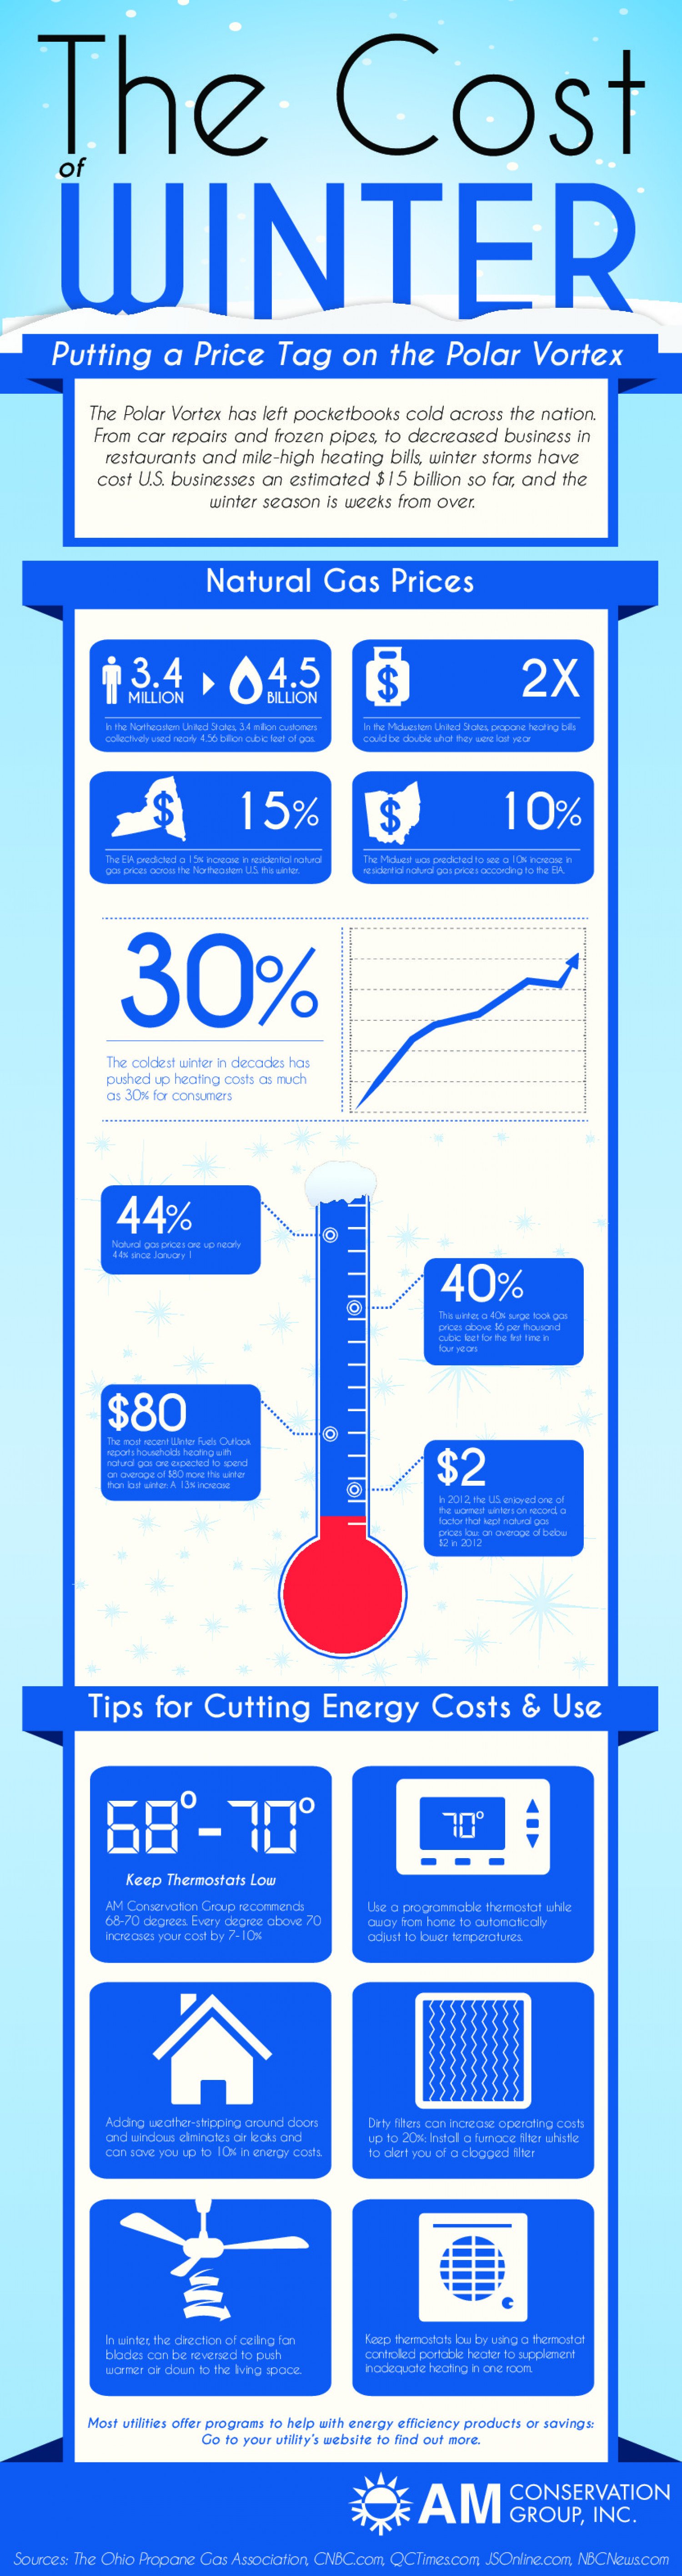 The Cost of Winter: Putting a Price Tag on the Polar Vortex Infographic